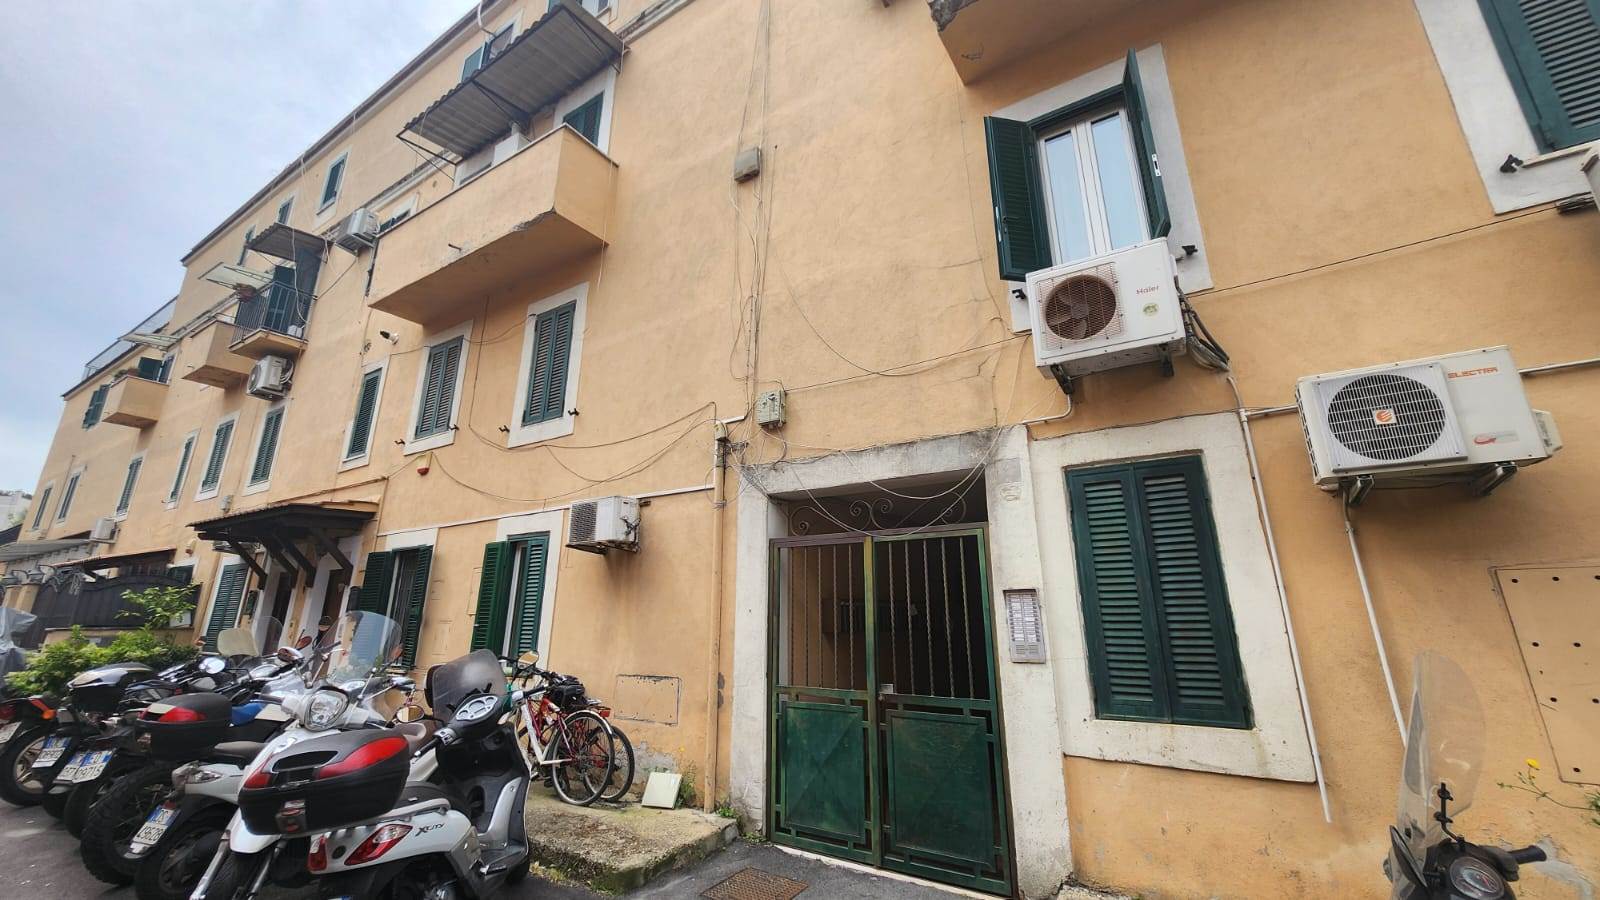 TUSCOLANO, ROMA, Loft for rent of 1 Sq. mt., Good condition, Heating Individual heating system, Energetic class: G, Epi: 175 kwh/m2 year, placed at 